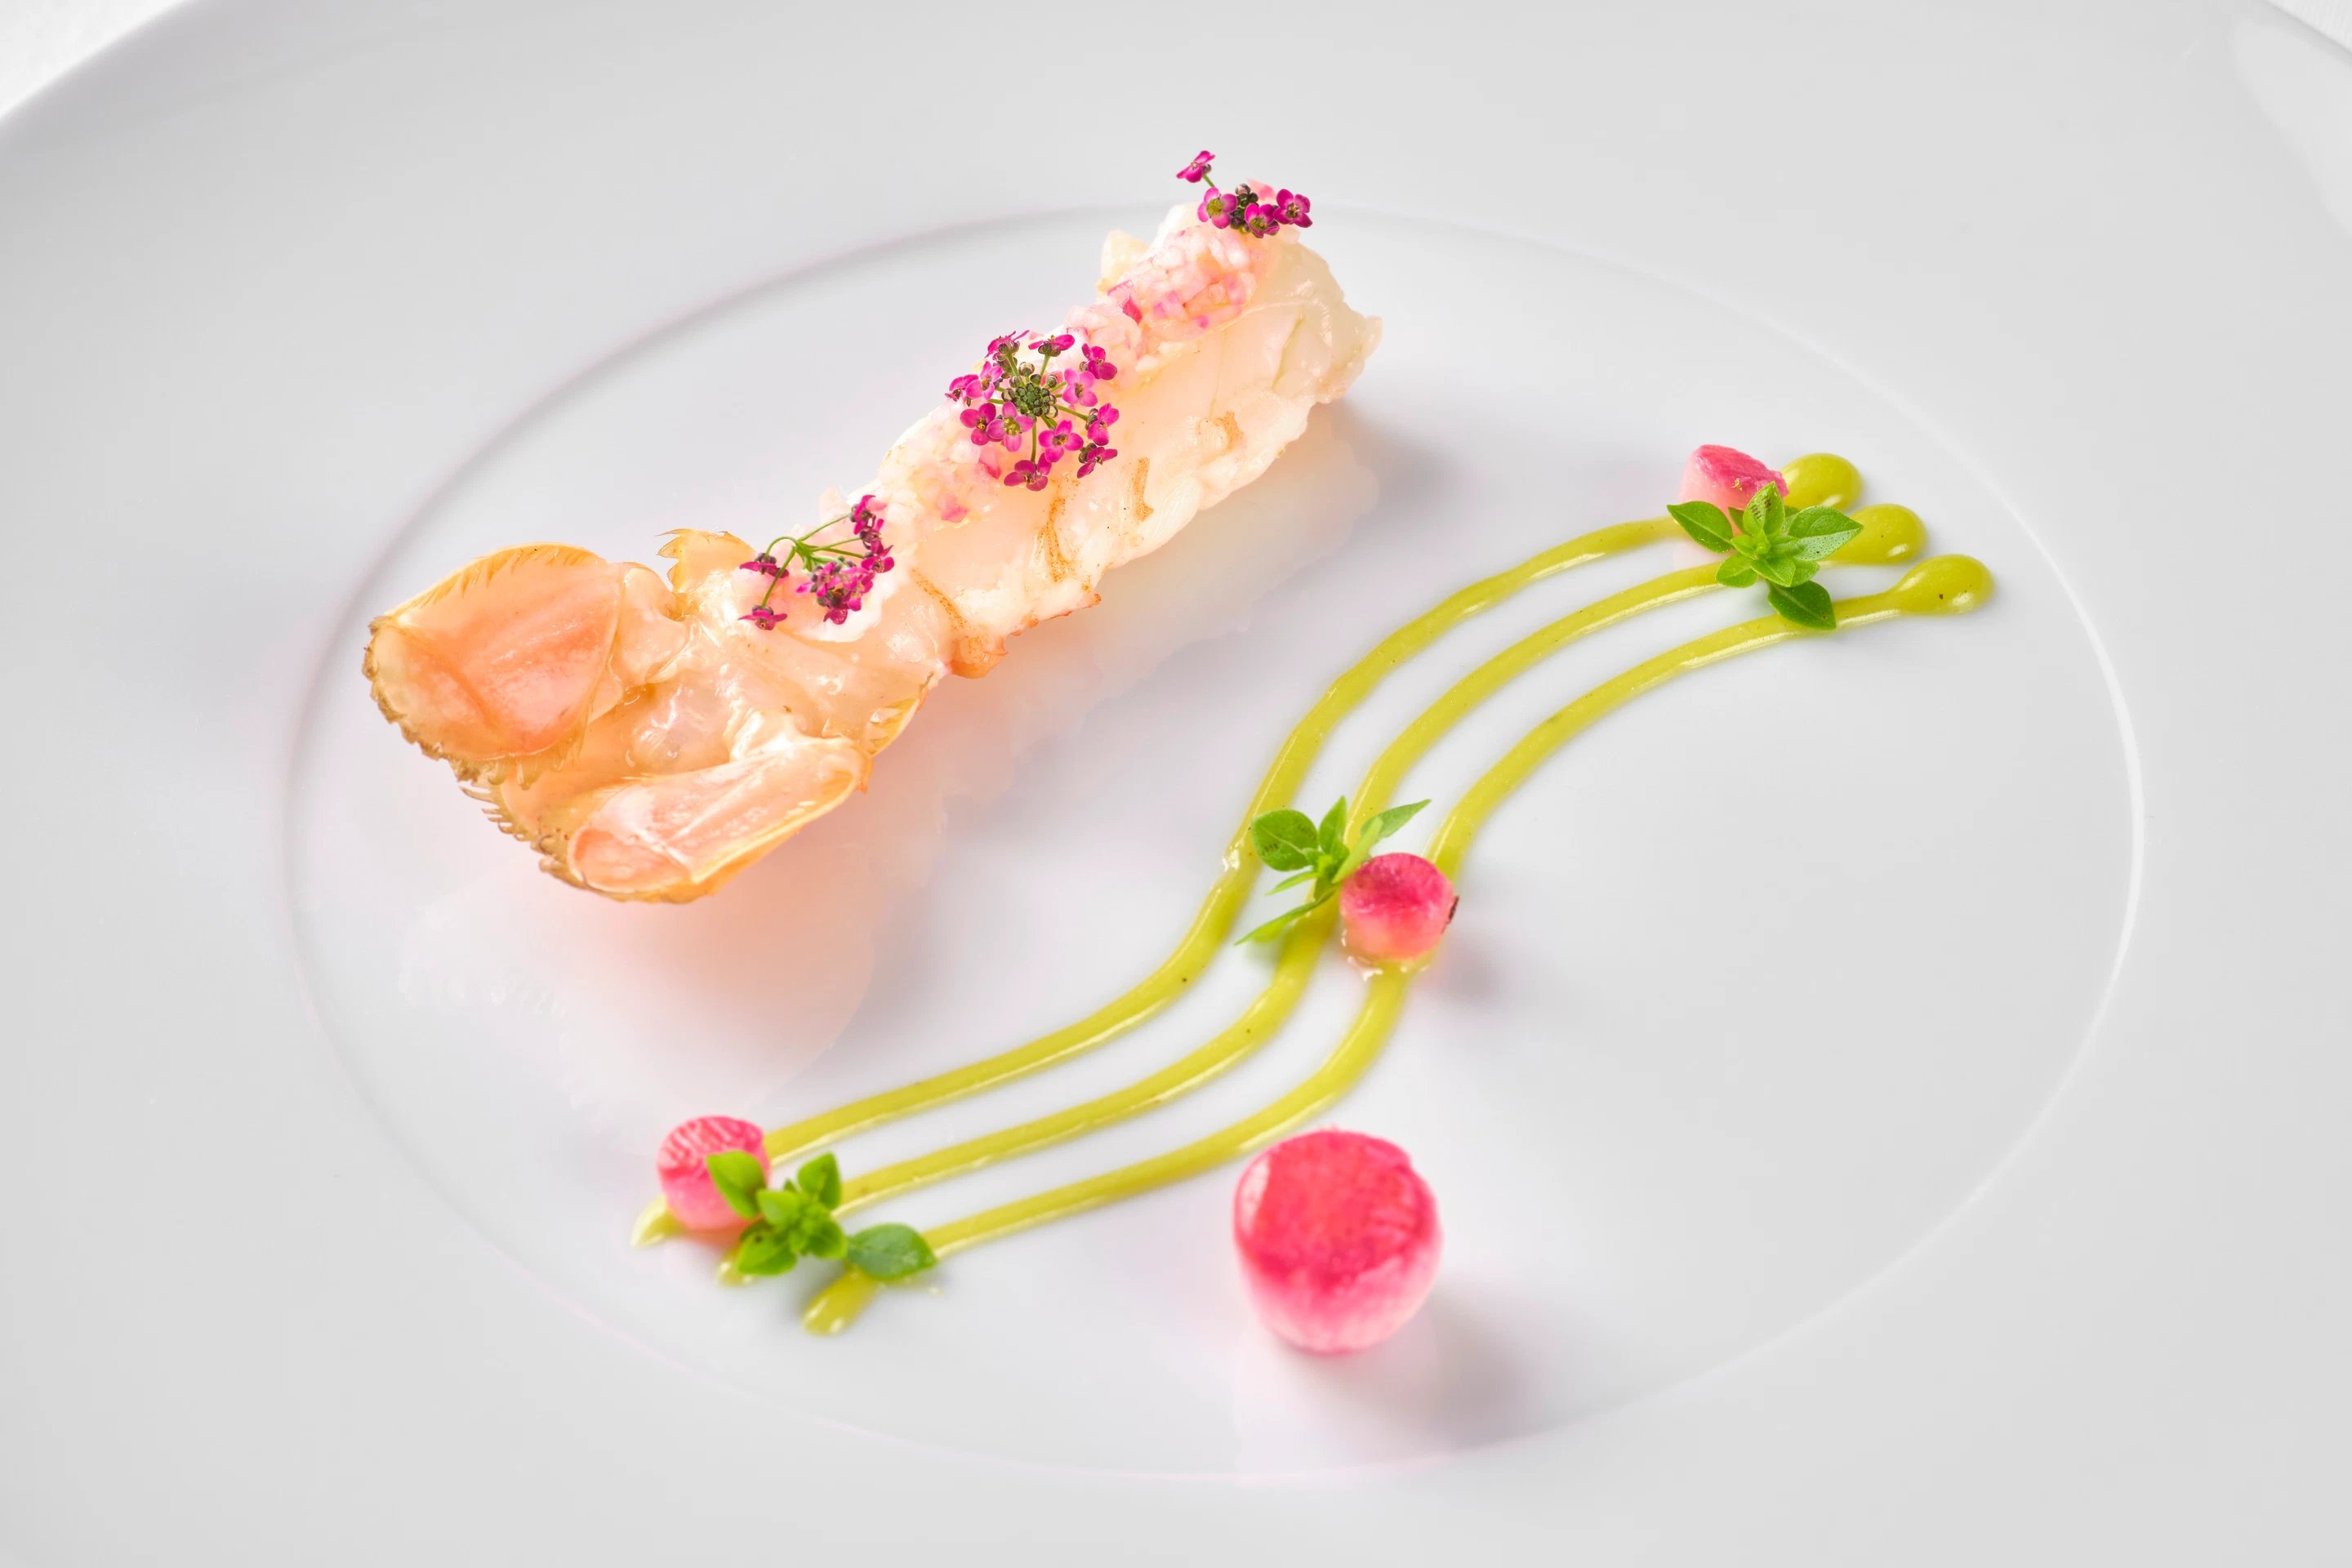 512/import-from-v1/images/Plat_Chef/2021/Langoustine_rotie_citron_confit_radis_red_meat__1.jpg